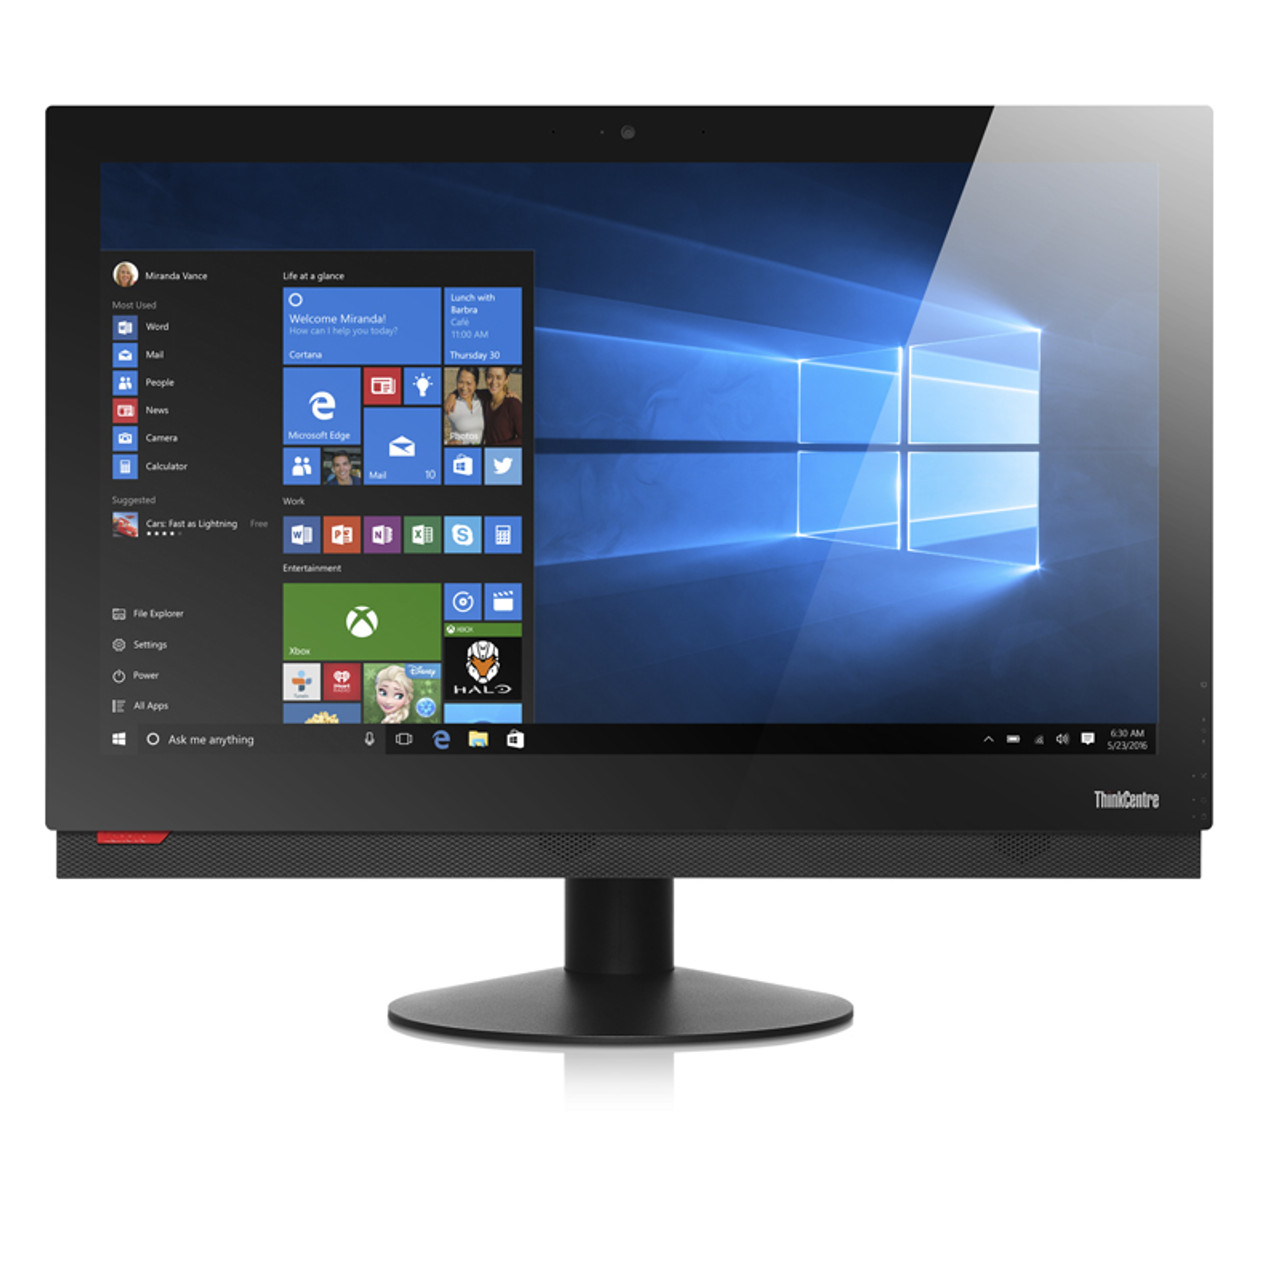 Lenovo ThinkCentre M910z 3.4GHz i5-7500 23.8" 1920 x 1080pixels Black All-in-One PC